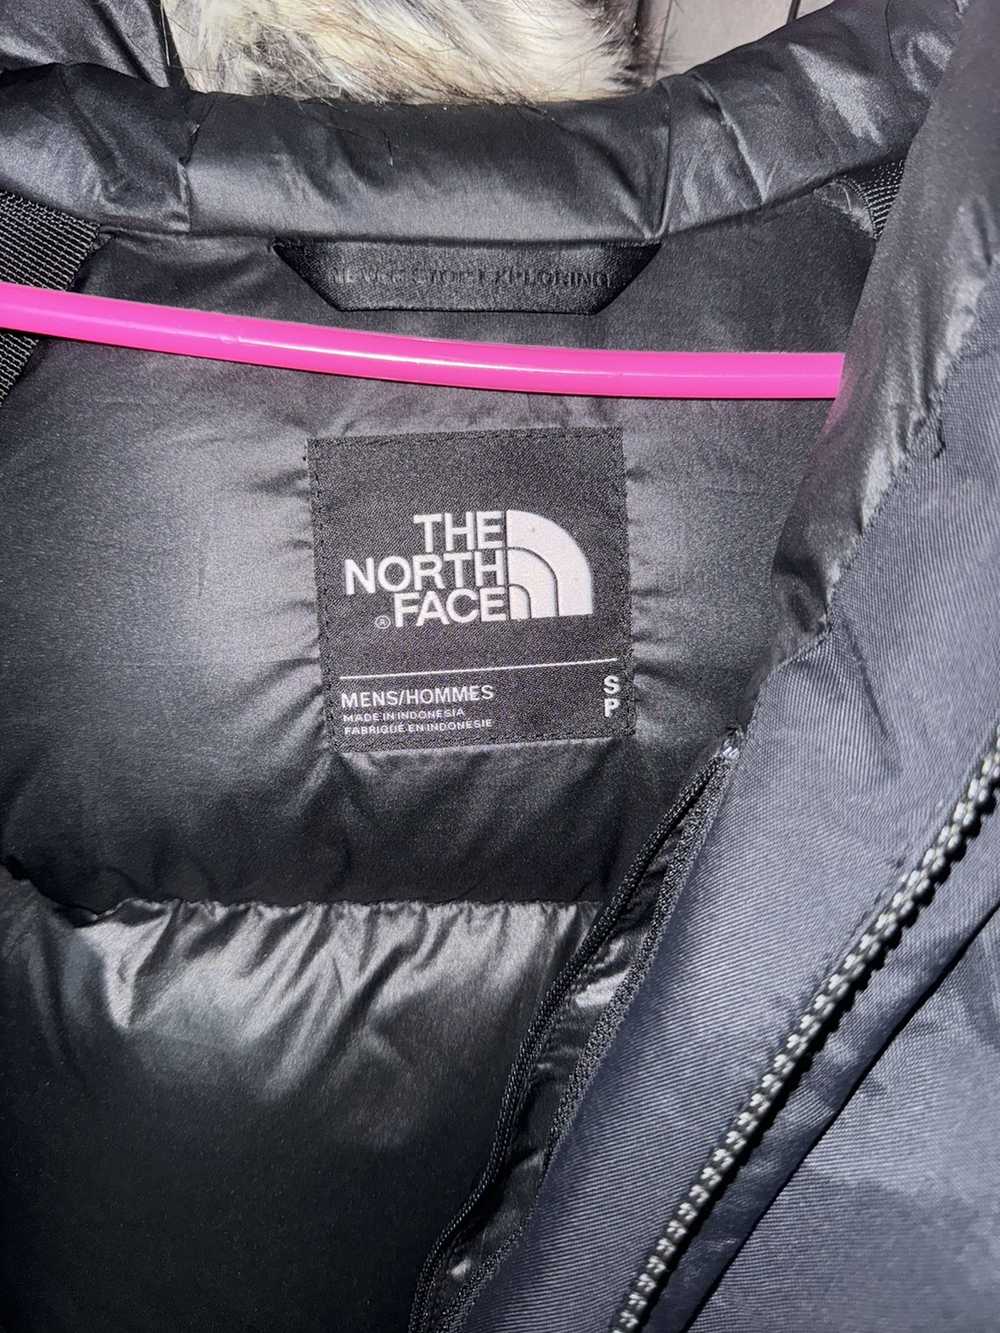 The North Face The North Face Parka - image 7